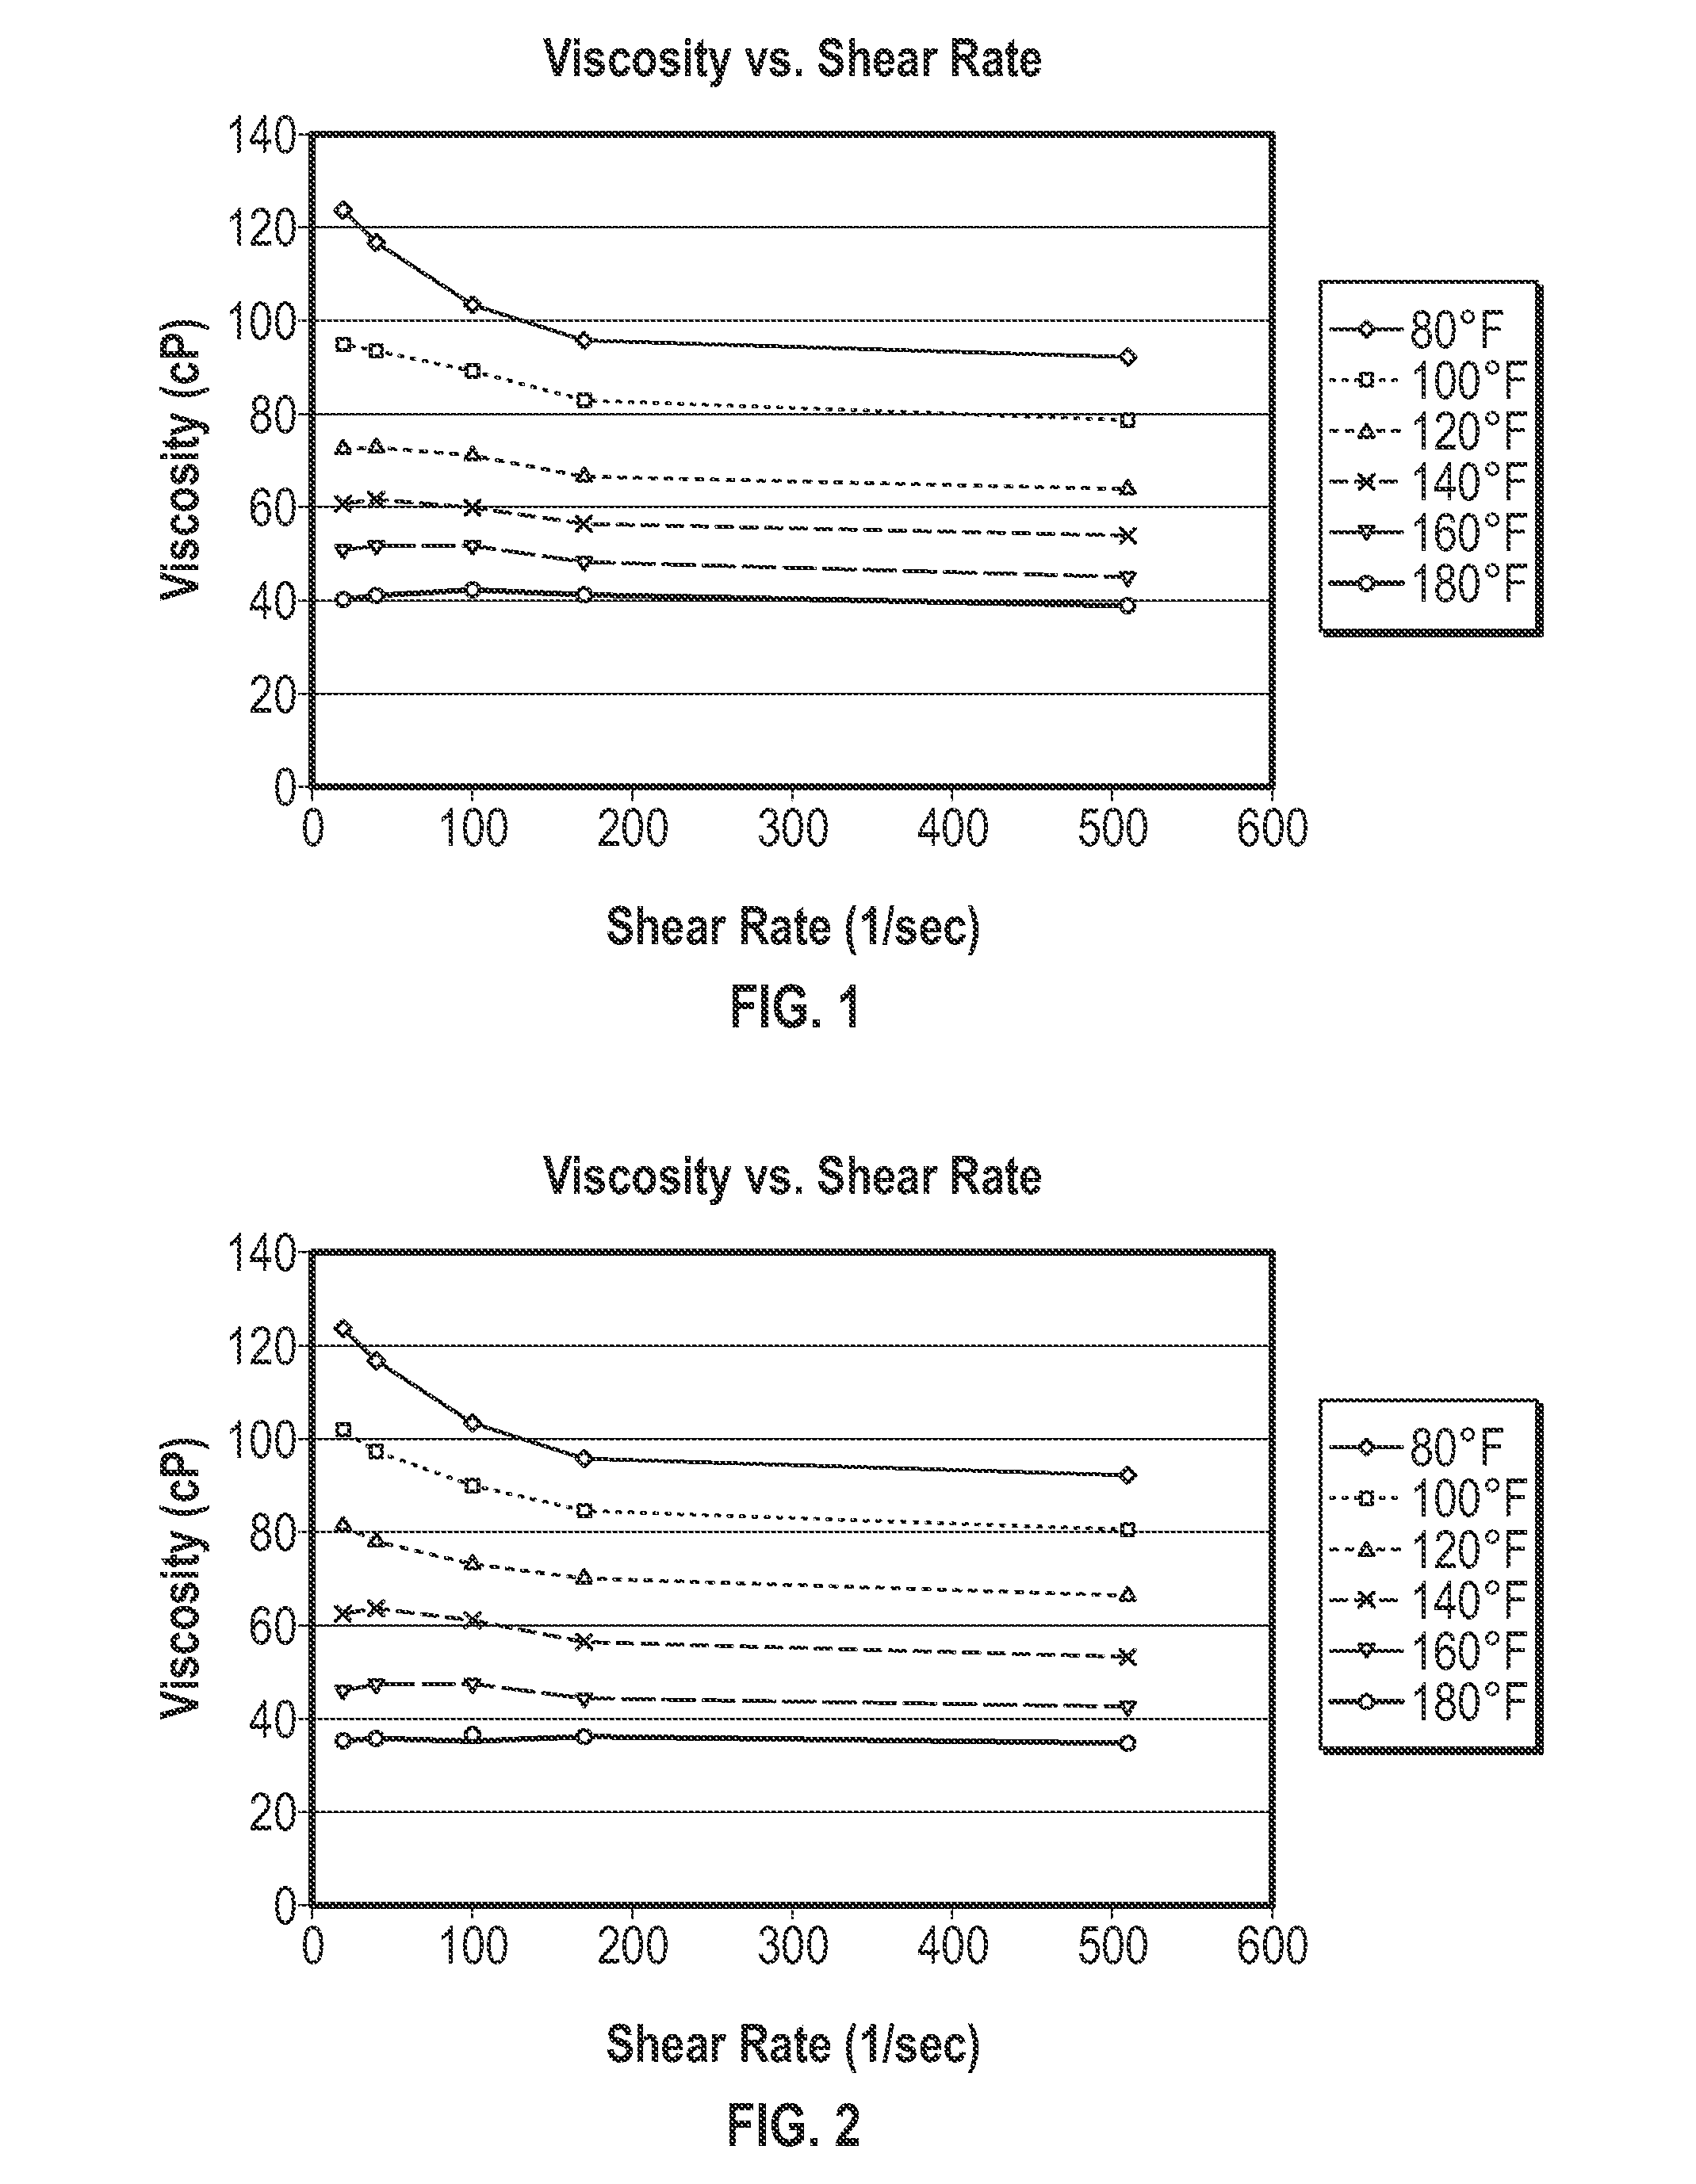 Acid-in-oil emulsion compositions and methods for treating hydrocarbon-bearing formations